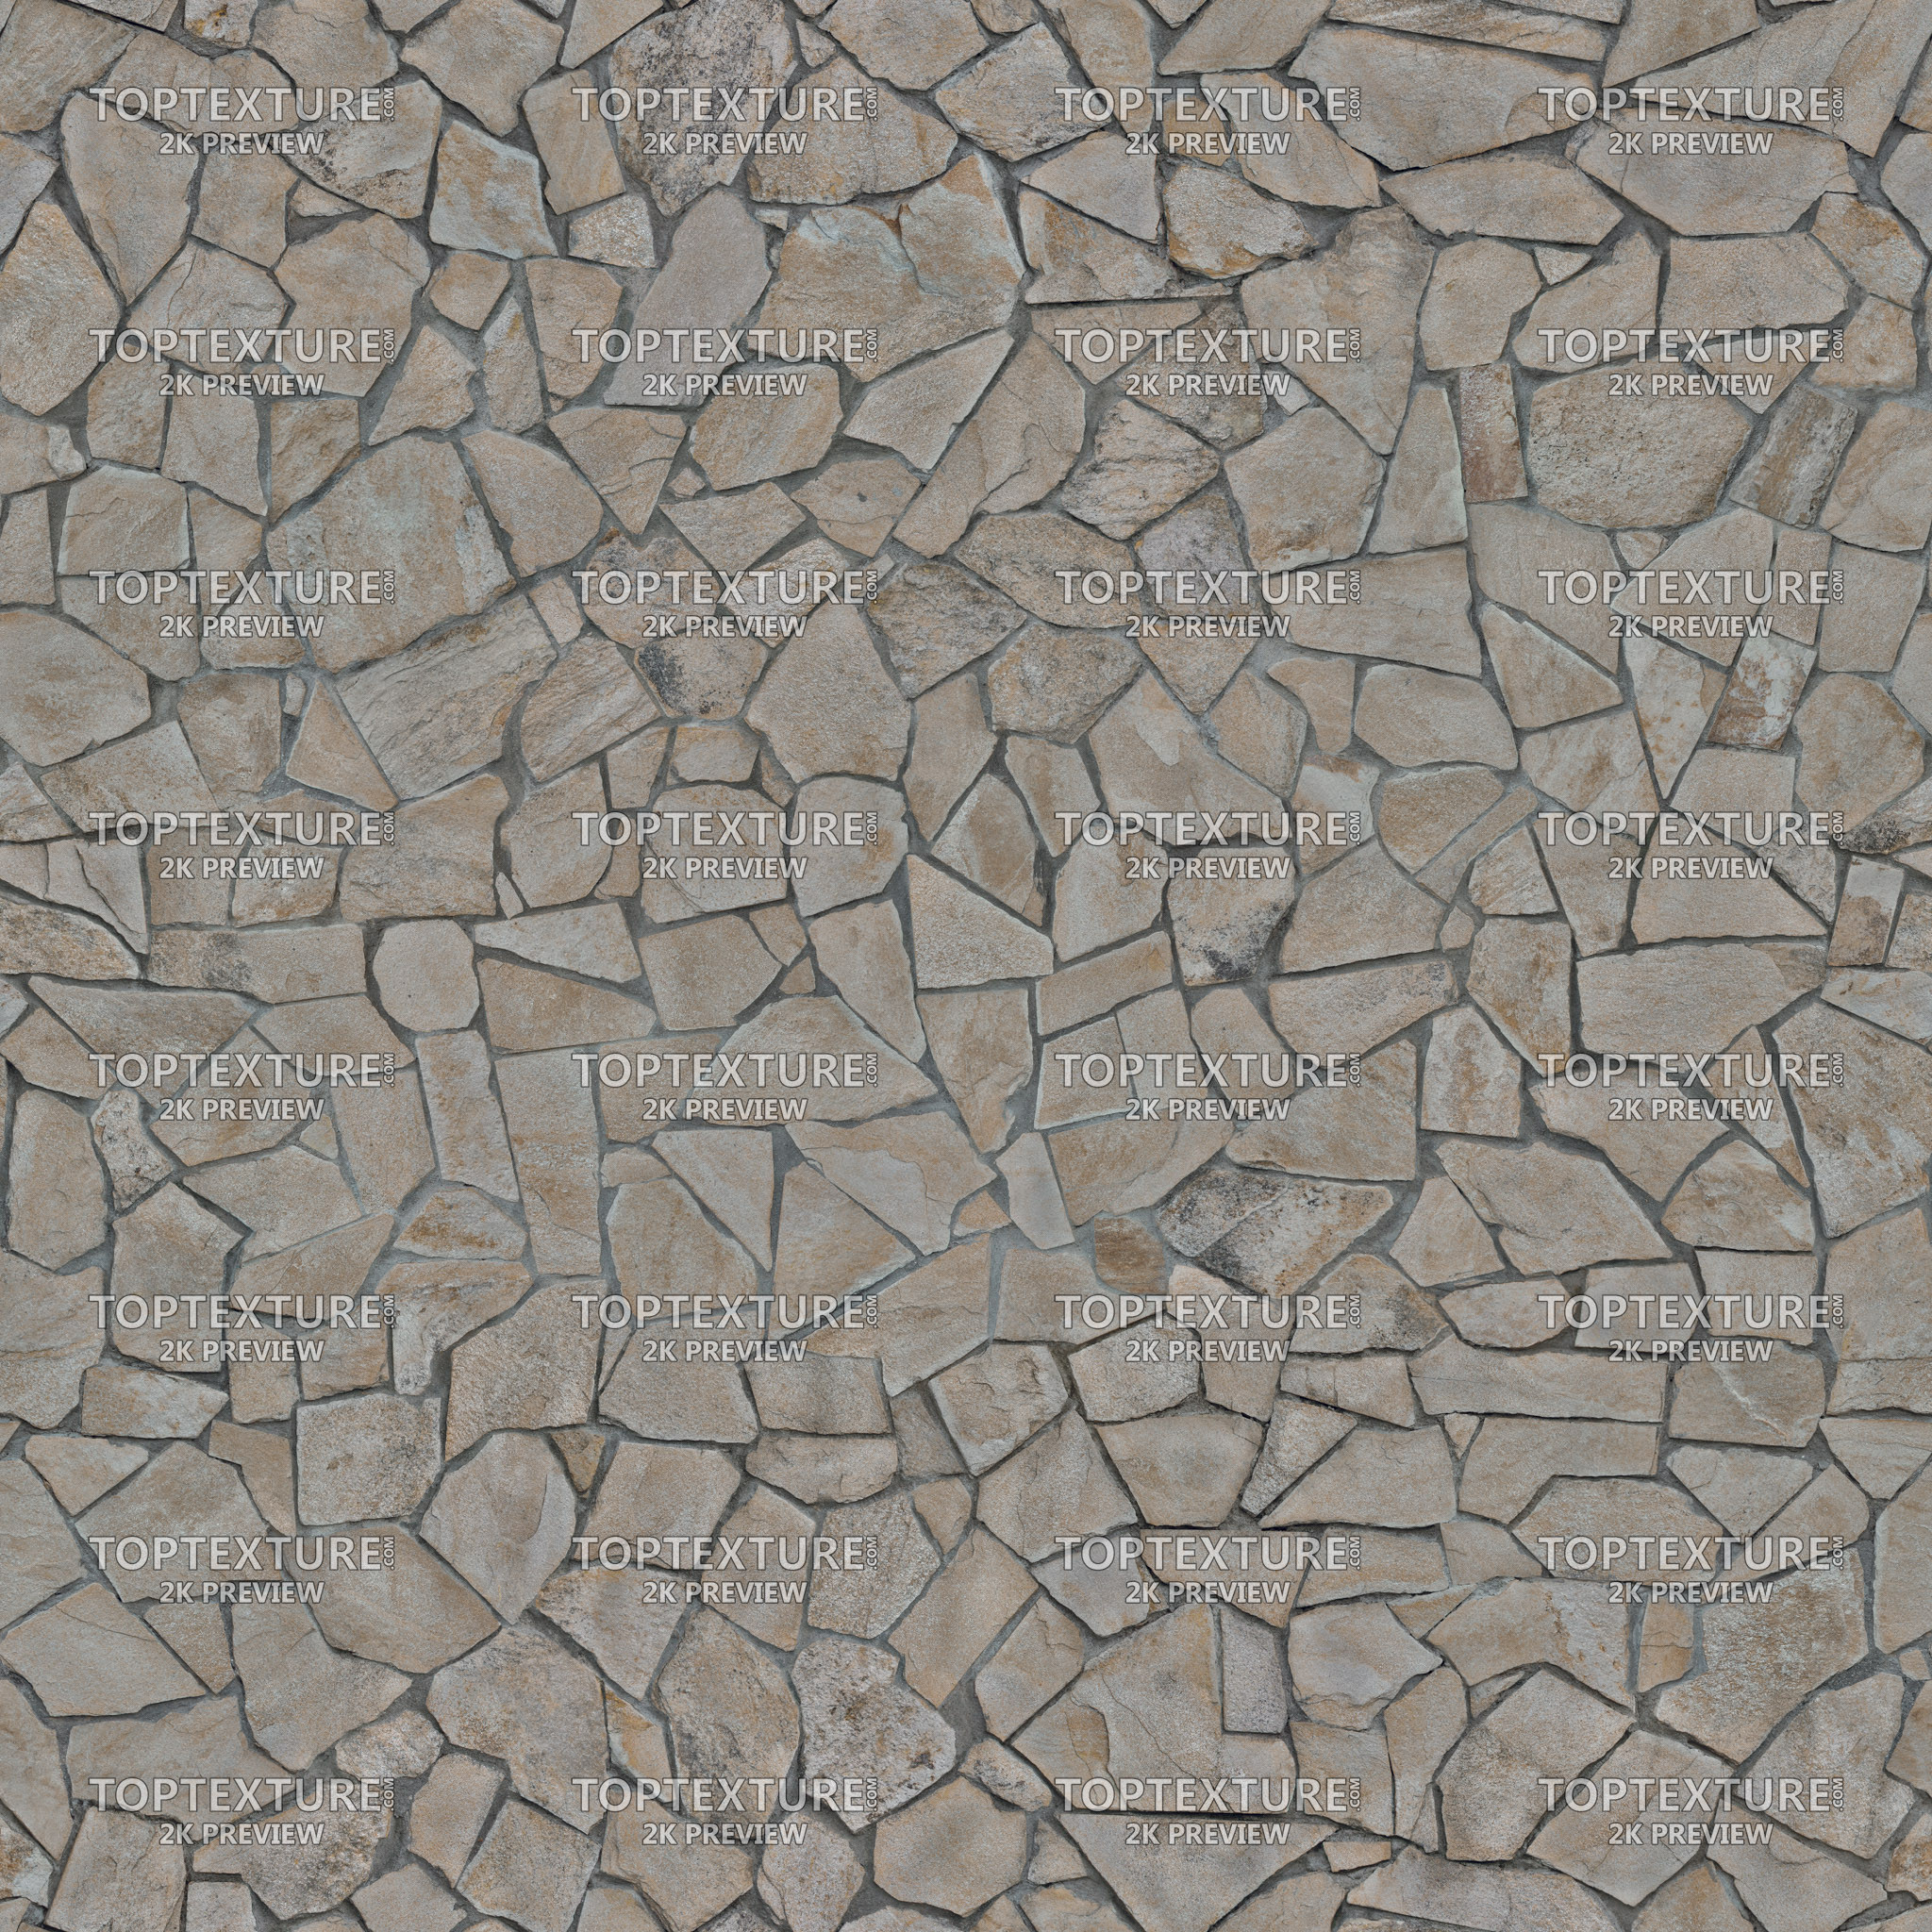 Irregular Shaped Beige-Brown Stone Tiles - 2K preview